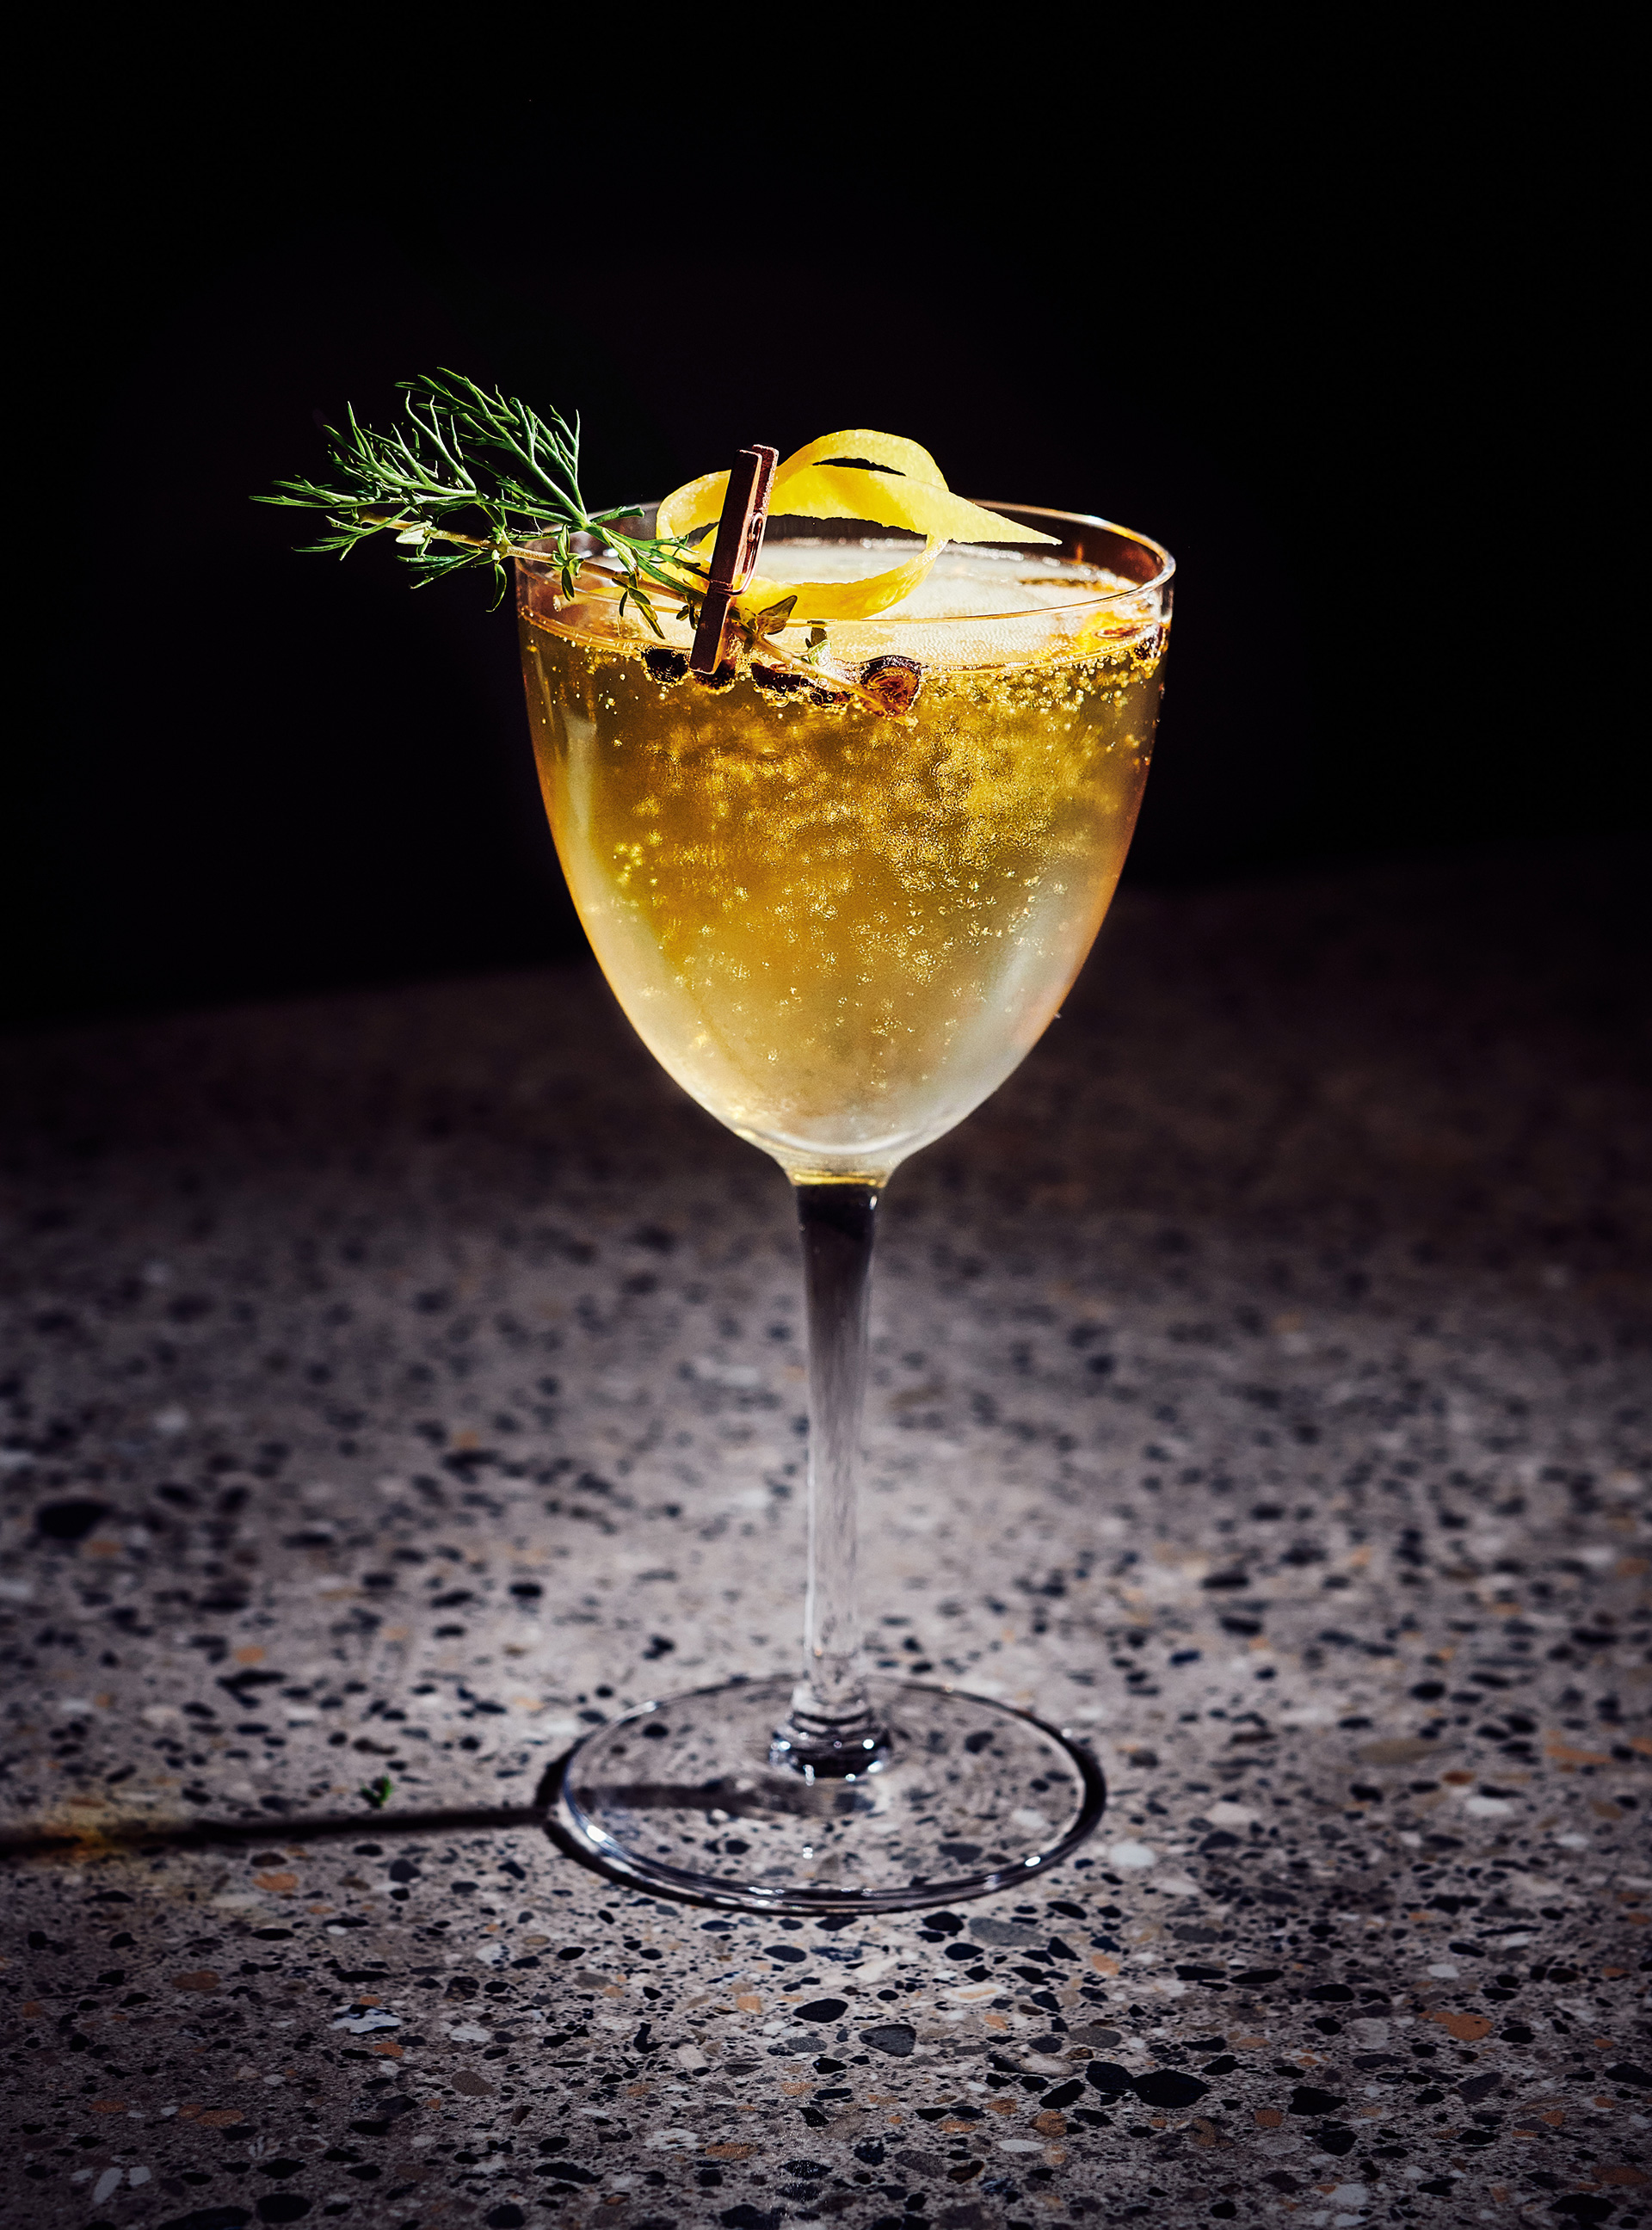 The Benediction (Champagne and Herb Liqueur Cocktail)